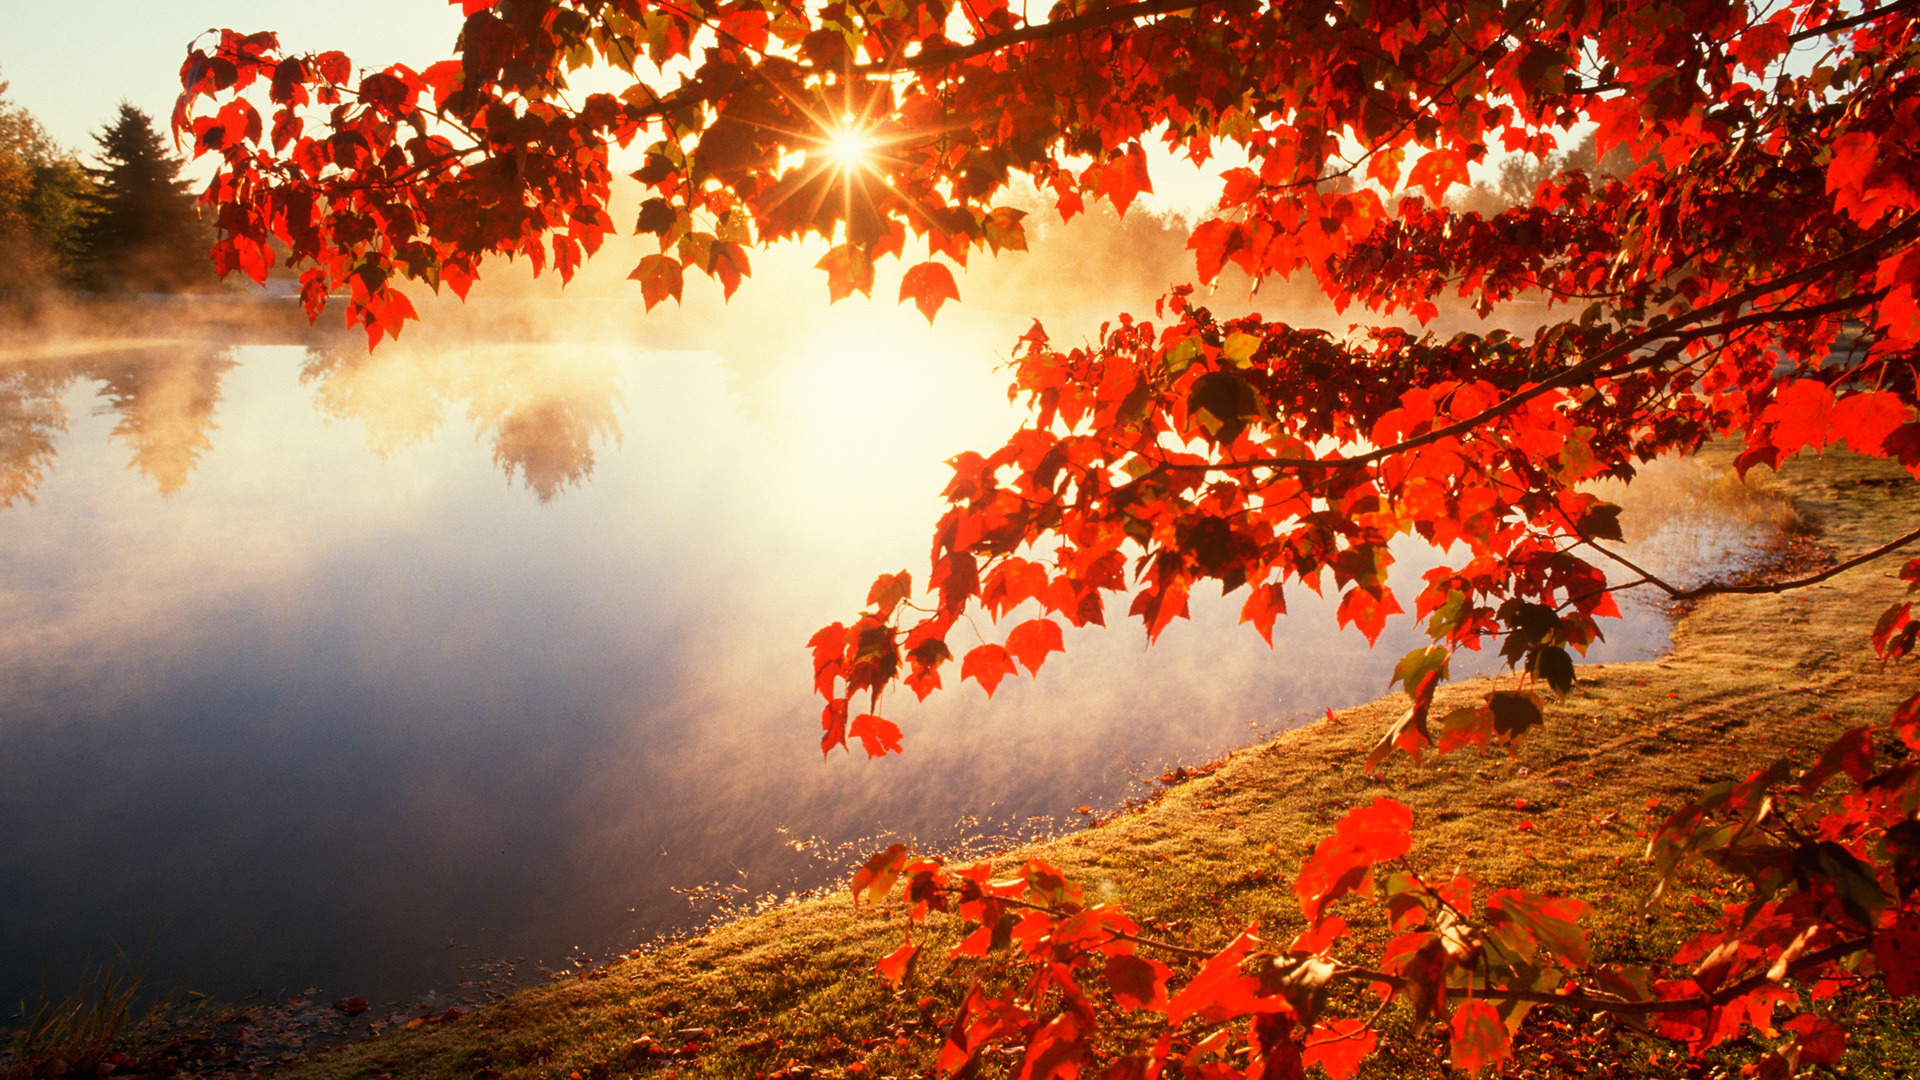 Autumn Leaves Wallpapers, Cute Autumn Leaves Wallpaper, #4750